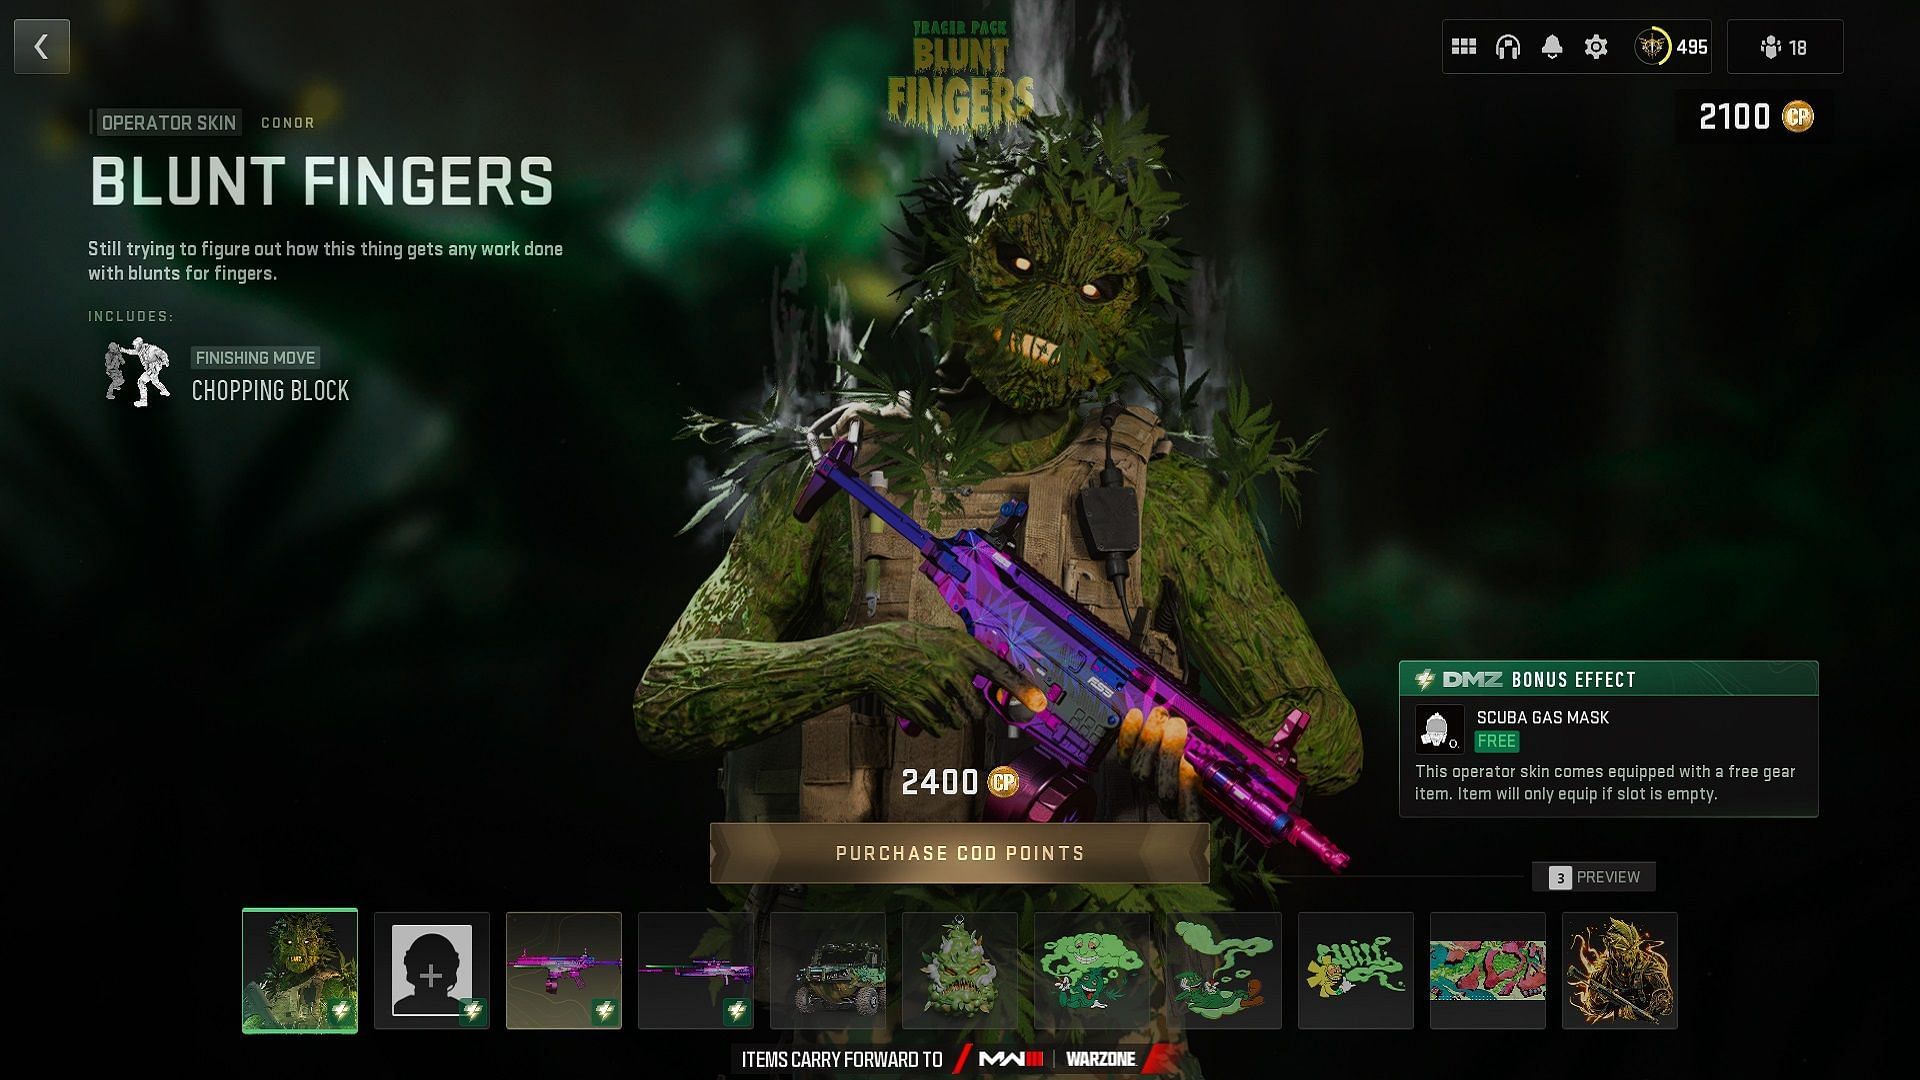 Blunt Fingers Bundle in Warzone 2 and MW2: Price, what's included, and more